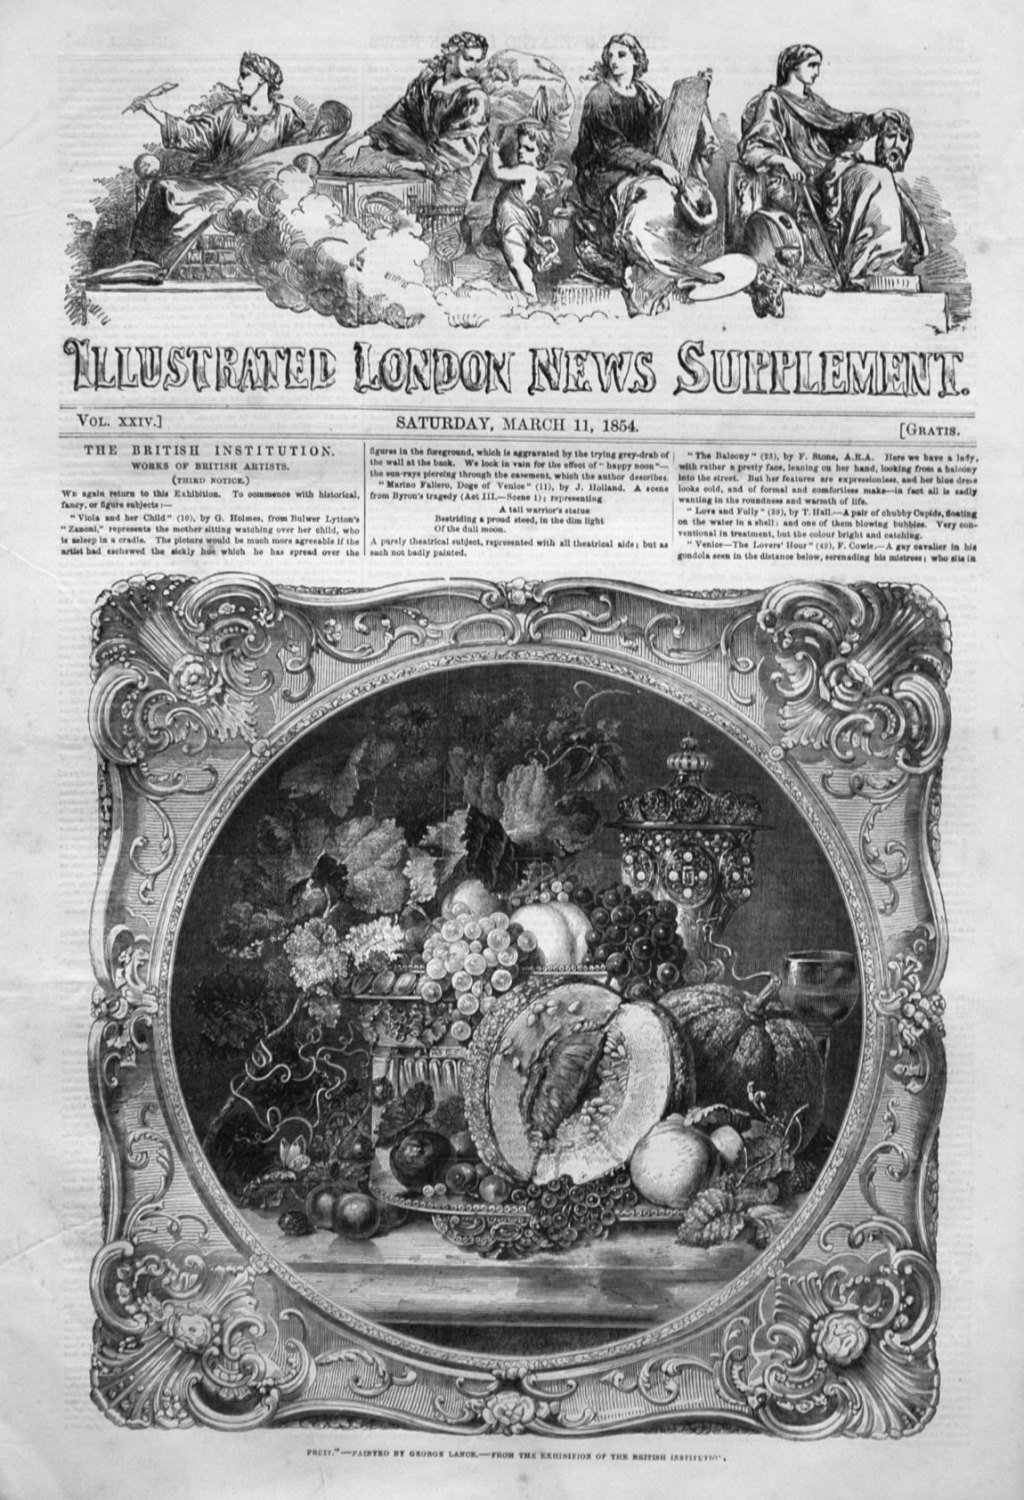 Illustrated London News (Supplement) for March 11th, 1854.